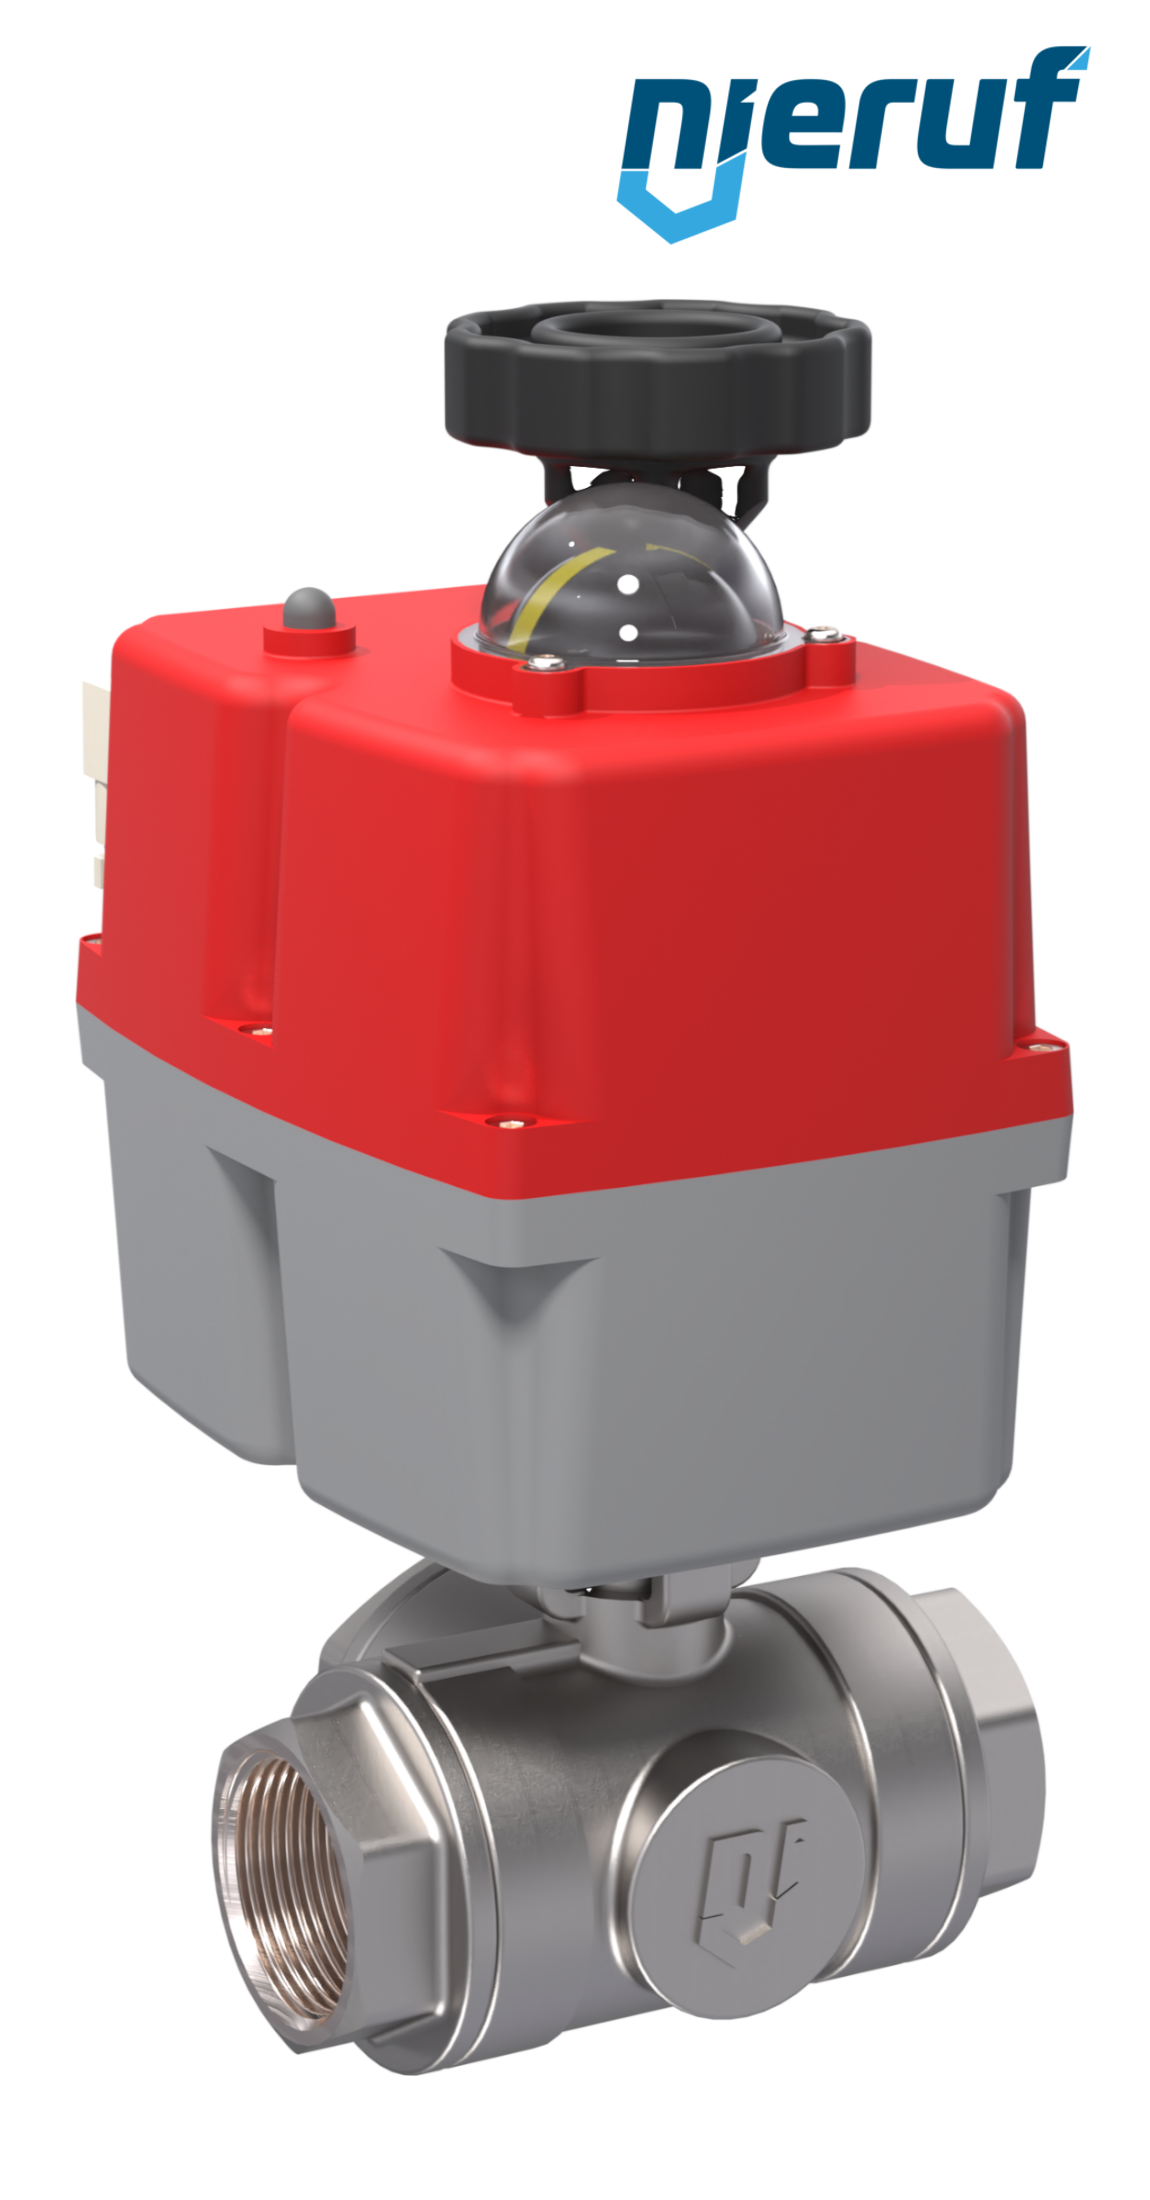 3 way automatic-ball valve 24-240V DN32 - 1 1/4" inch stainless steel reduced port design with T drilling